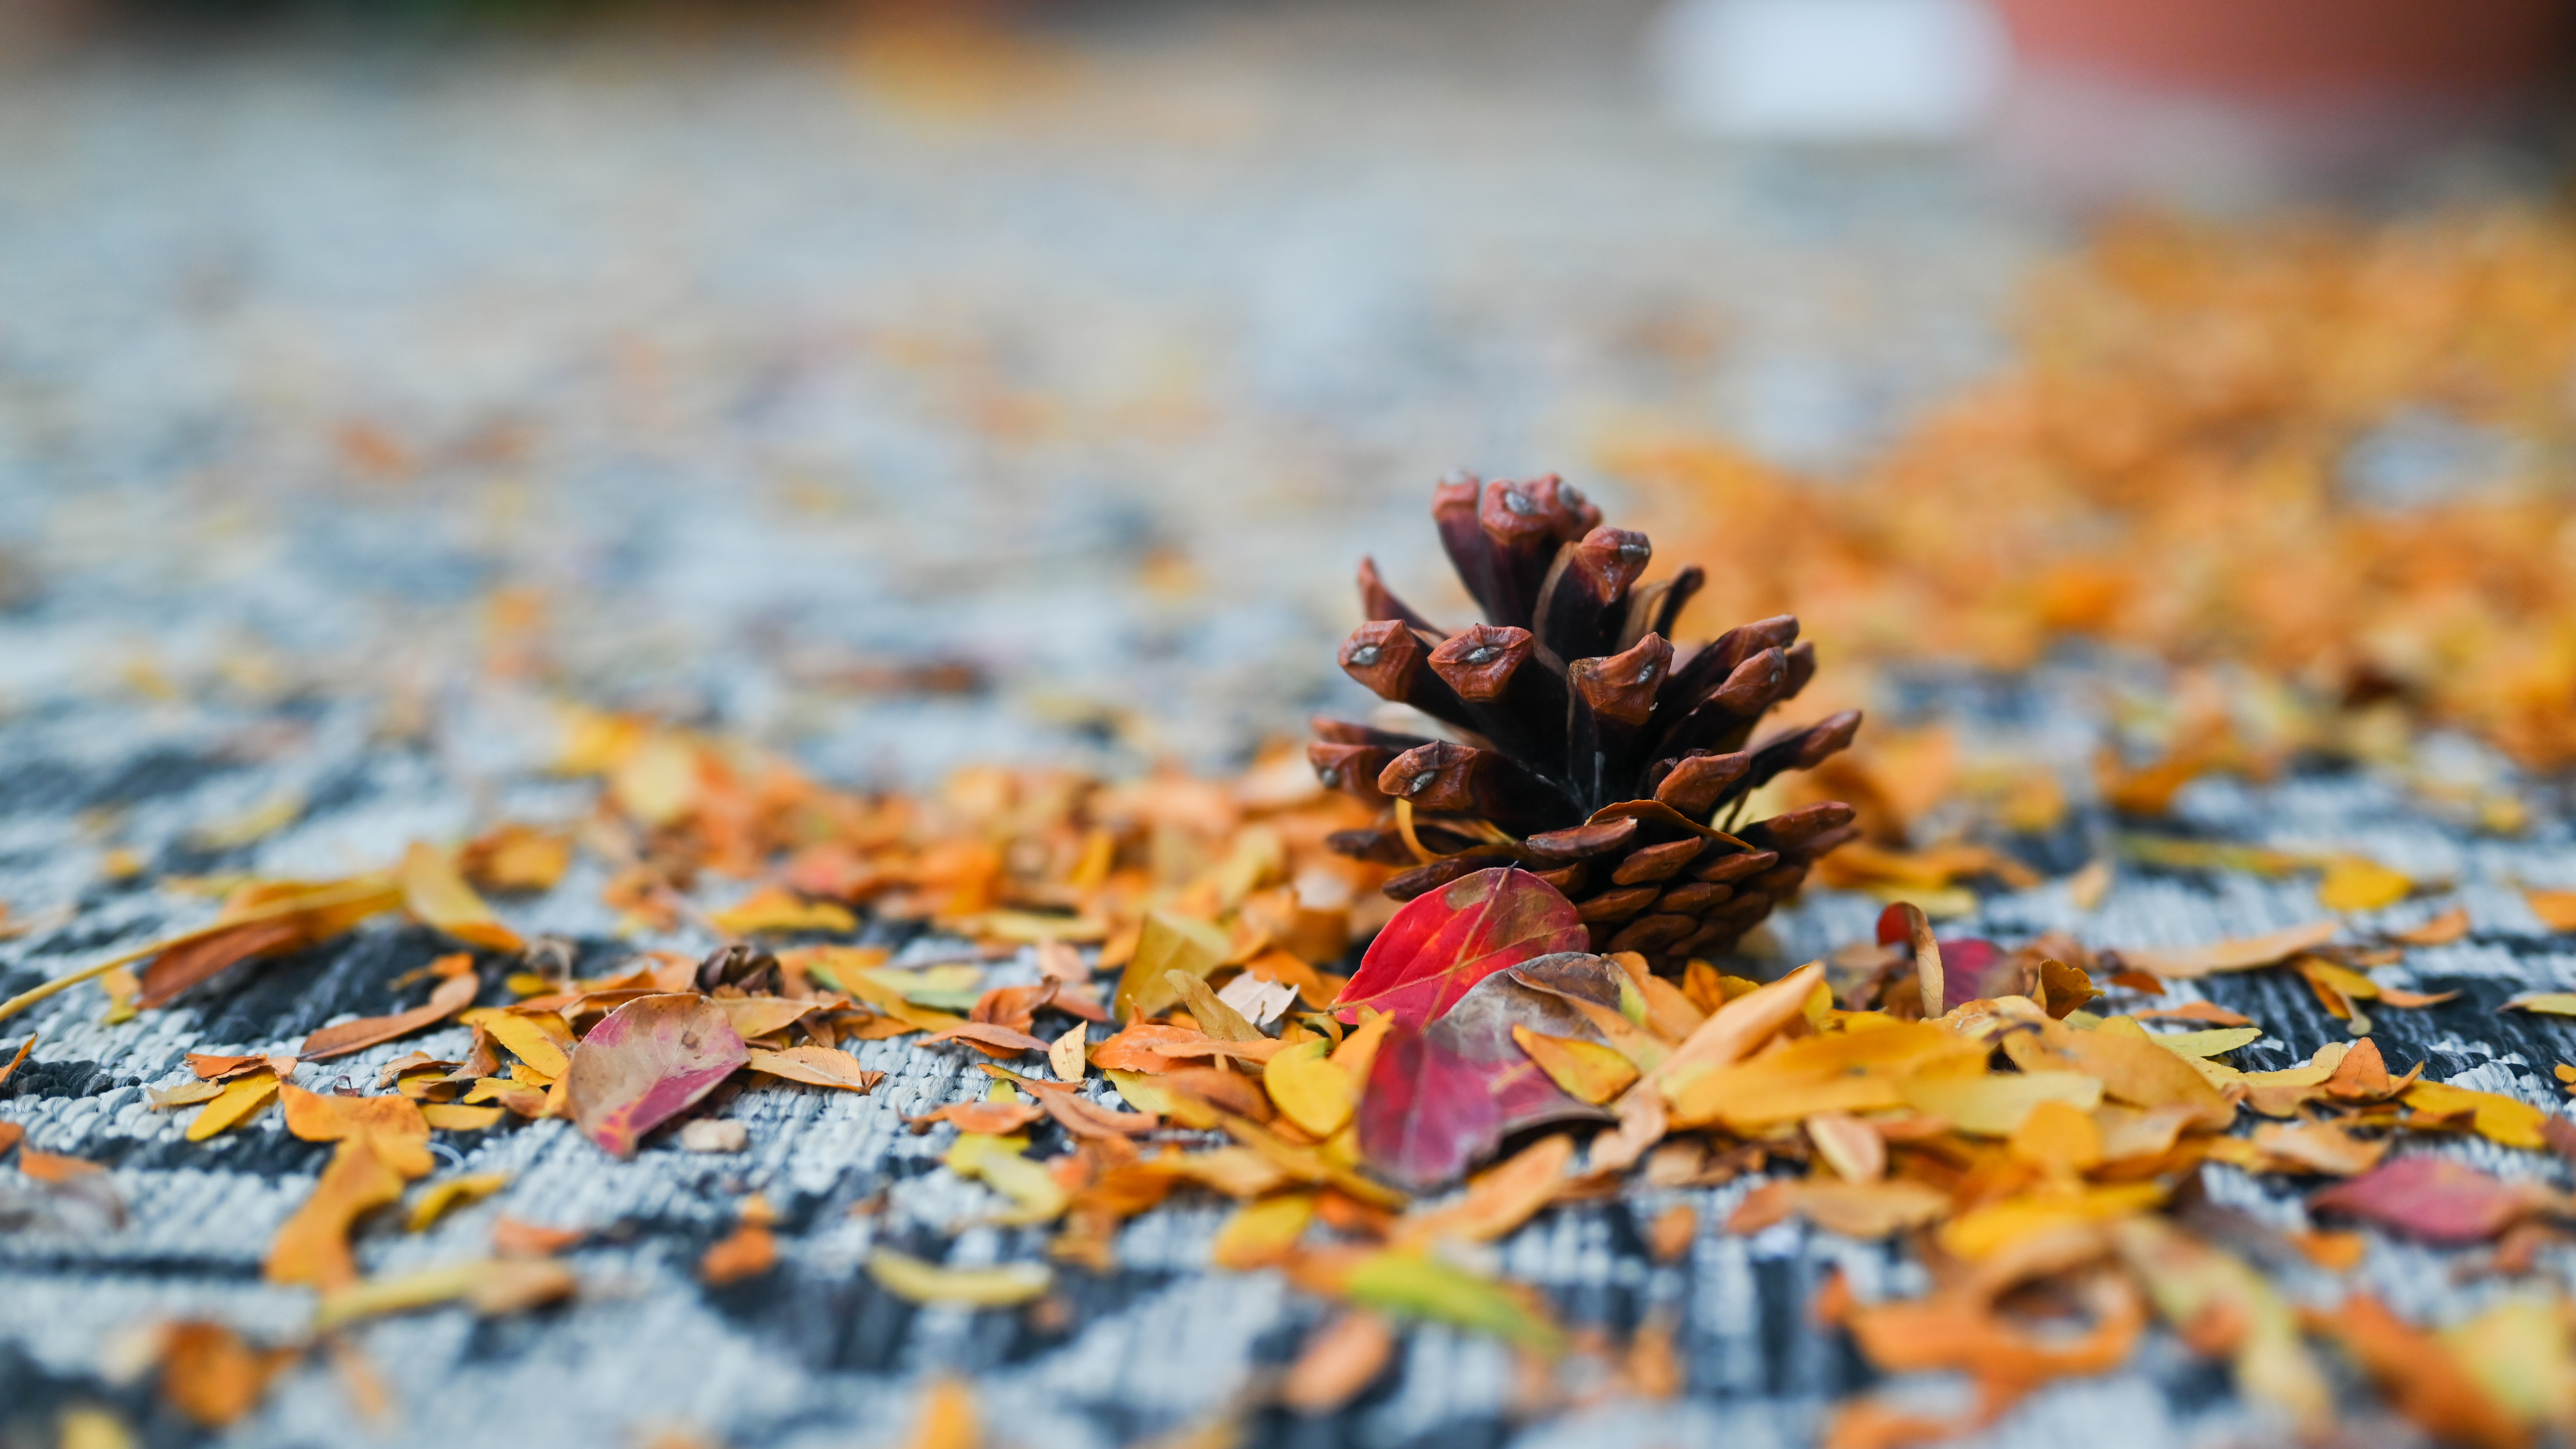 General 6016x3384 fall leaves nature plants yellow leaves red leaves photography fallen leaves depth of field cones